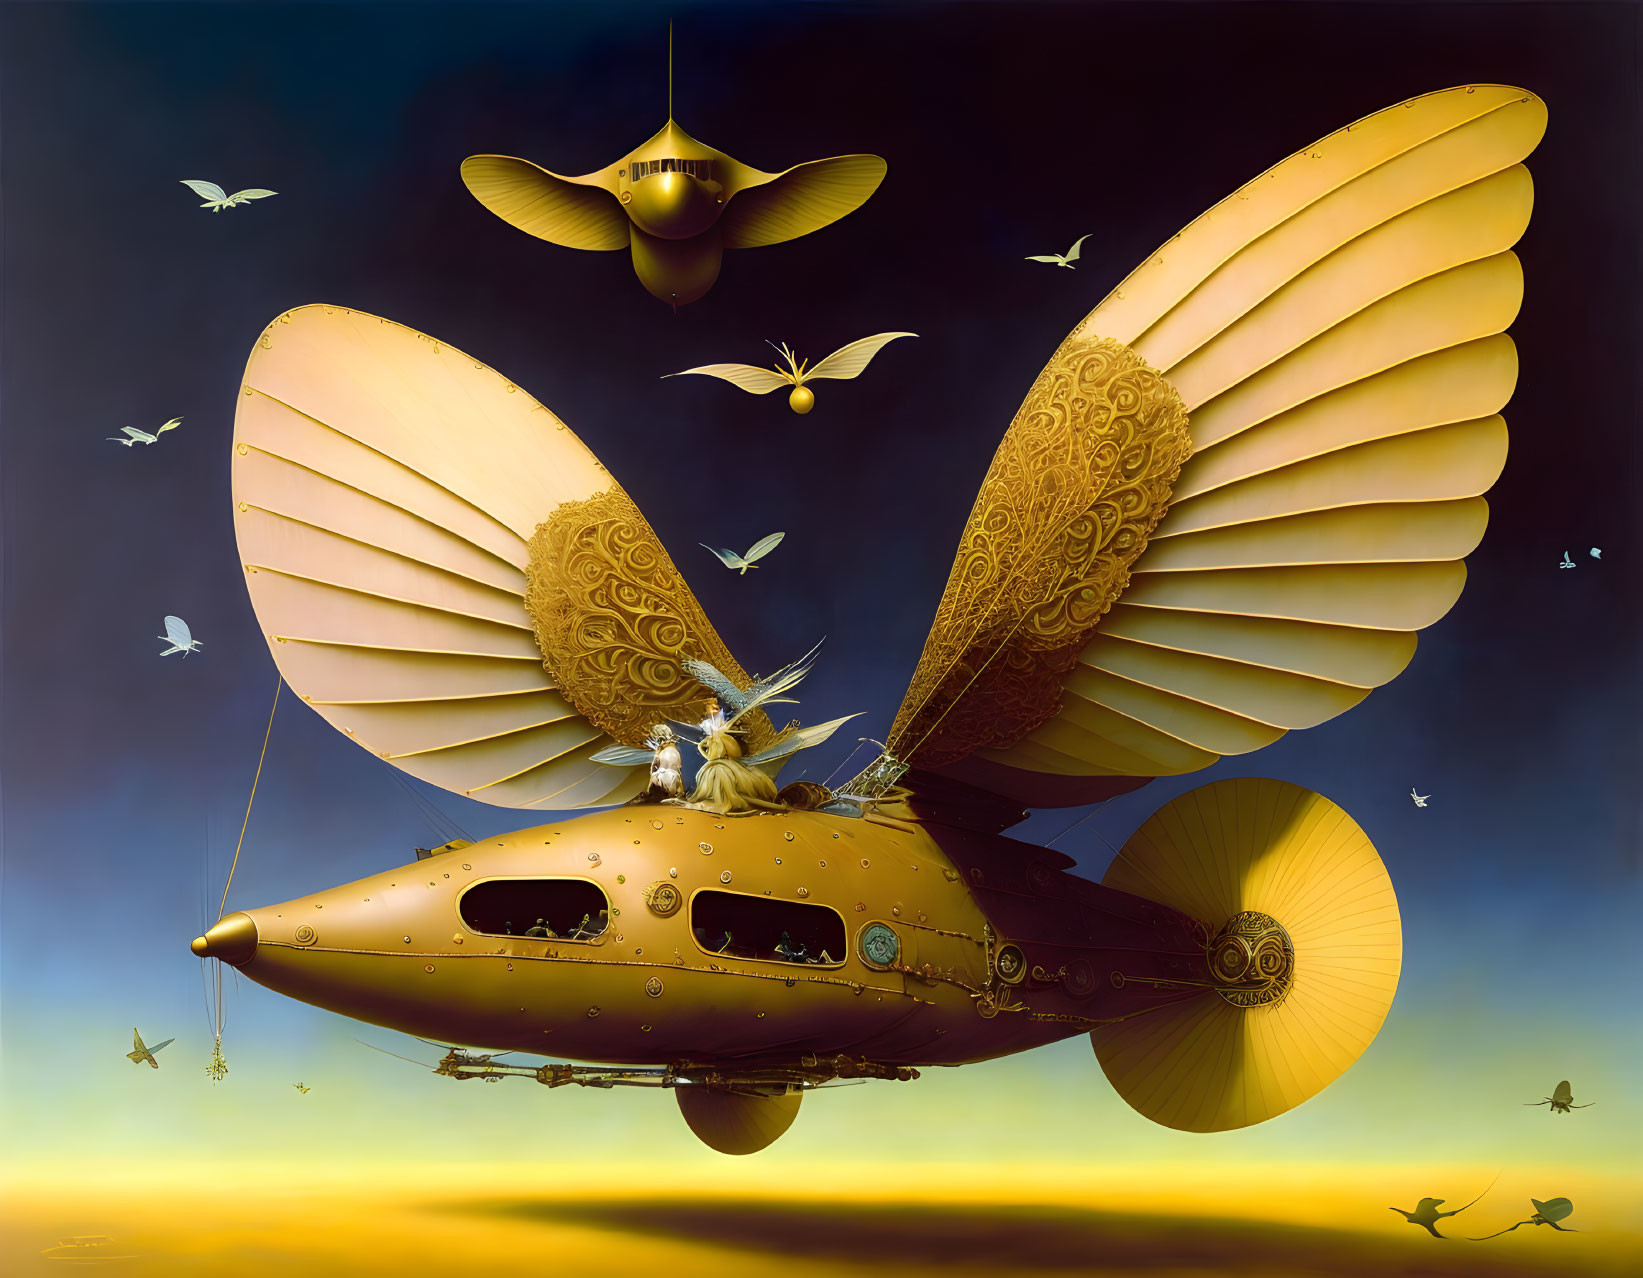 Surreal artwork of fish-shaped airship with wings in golden sky